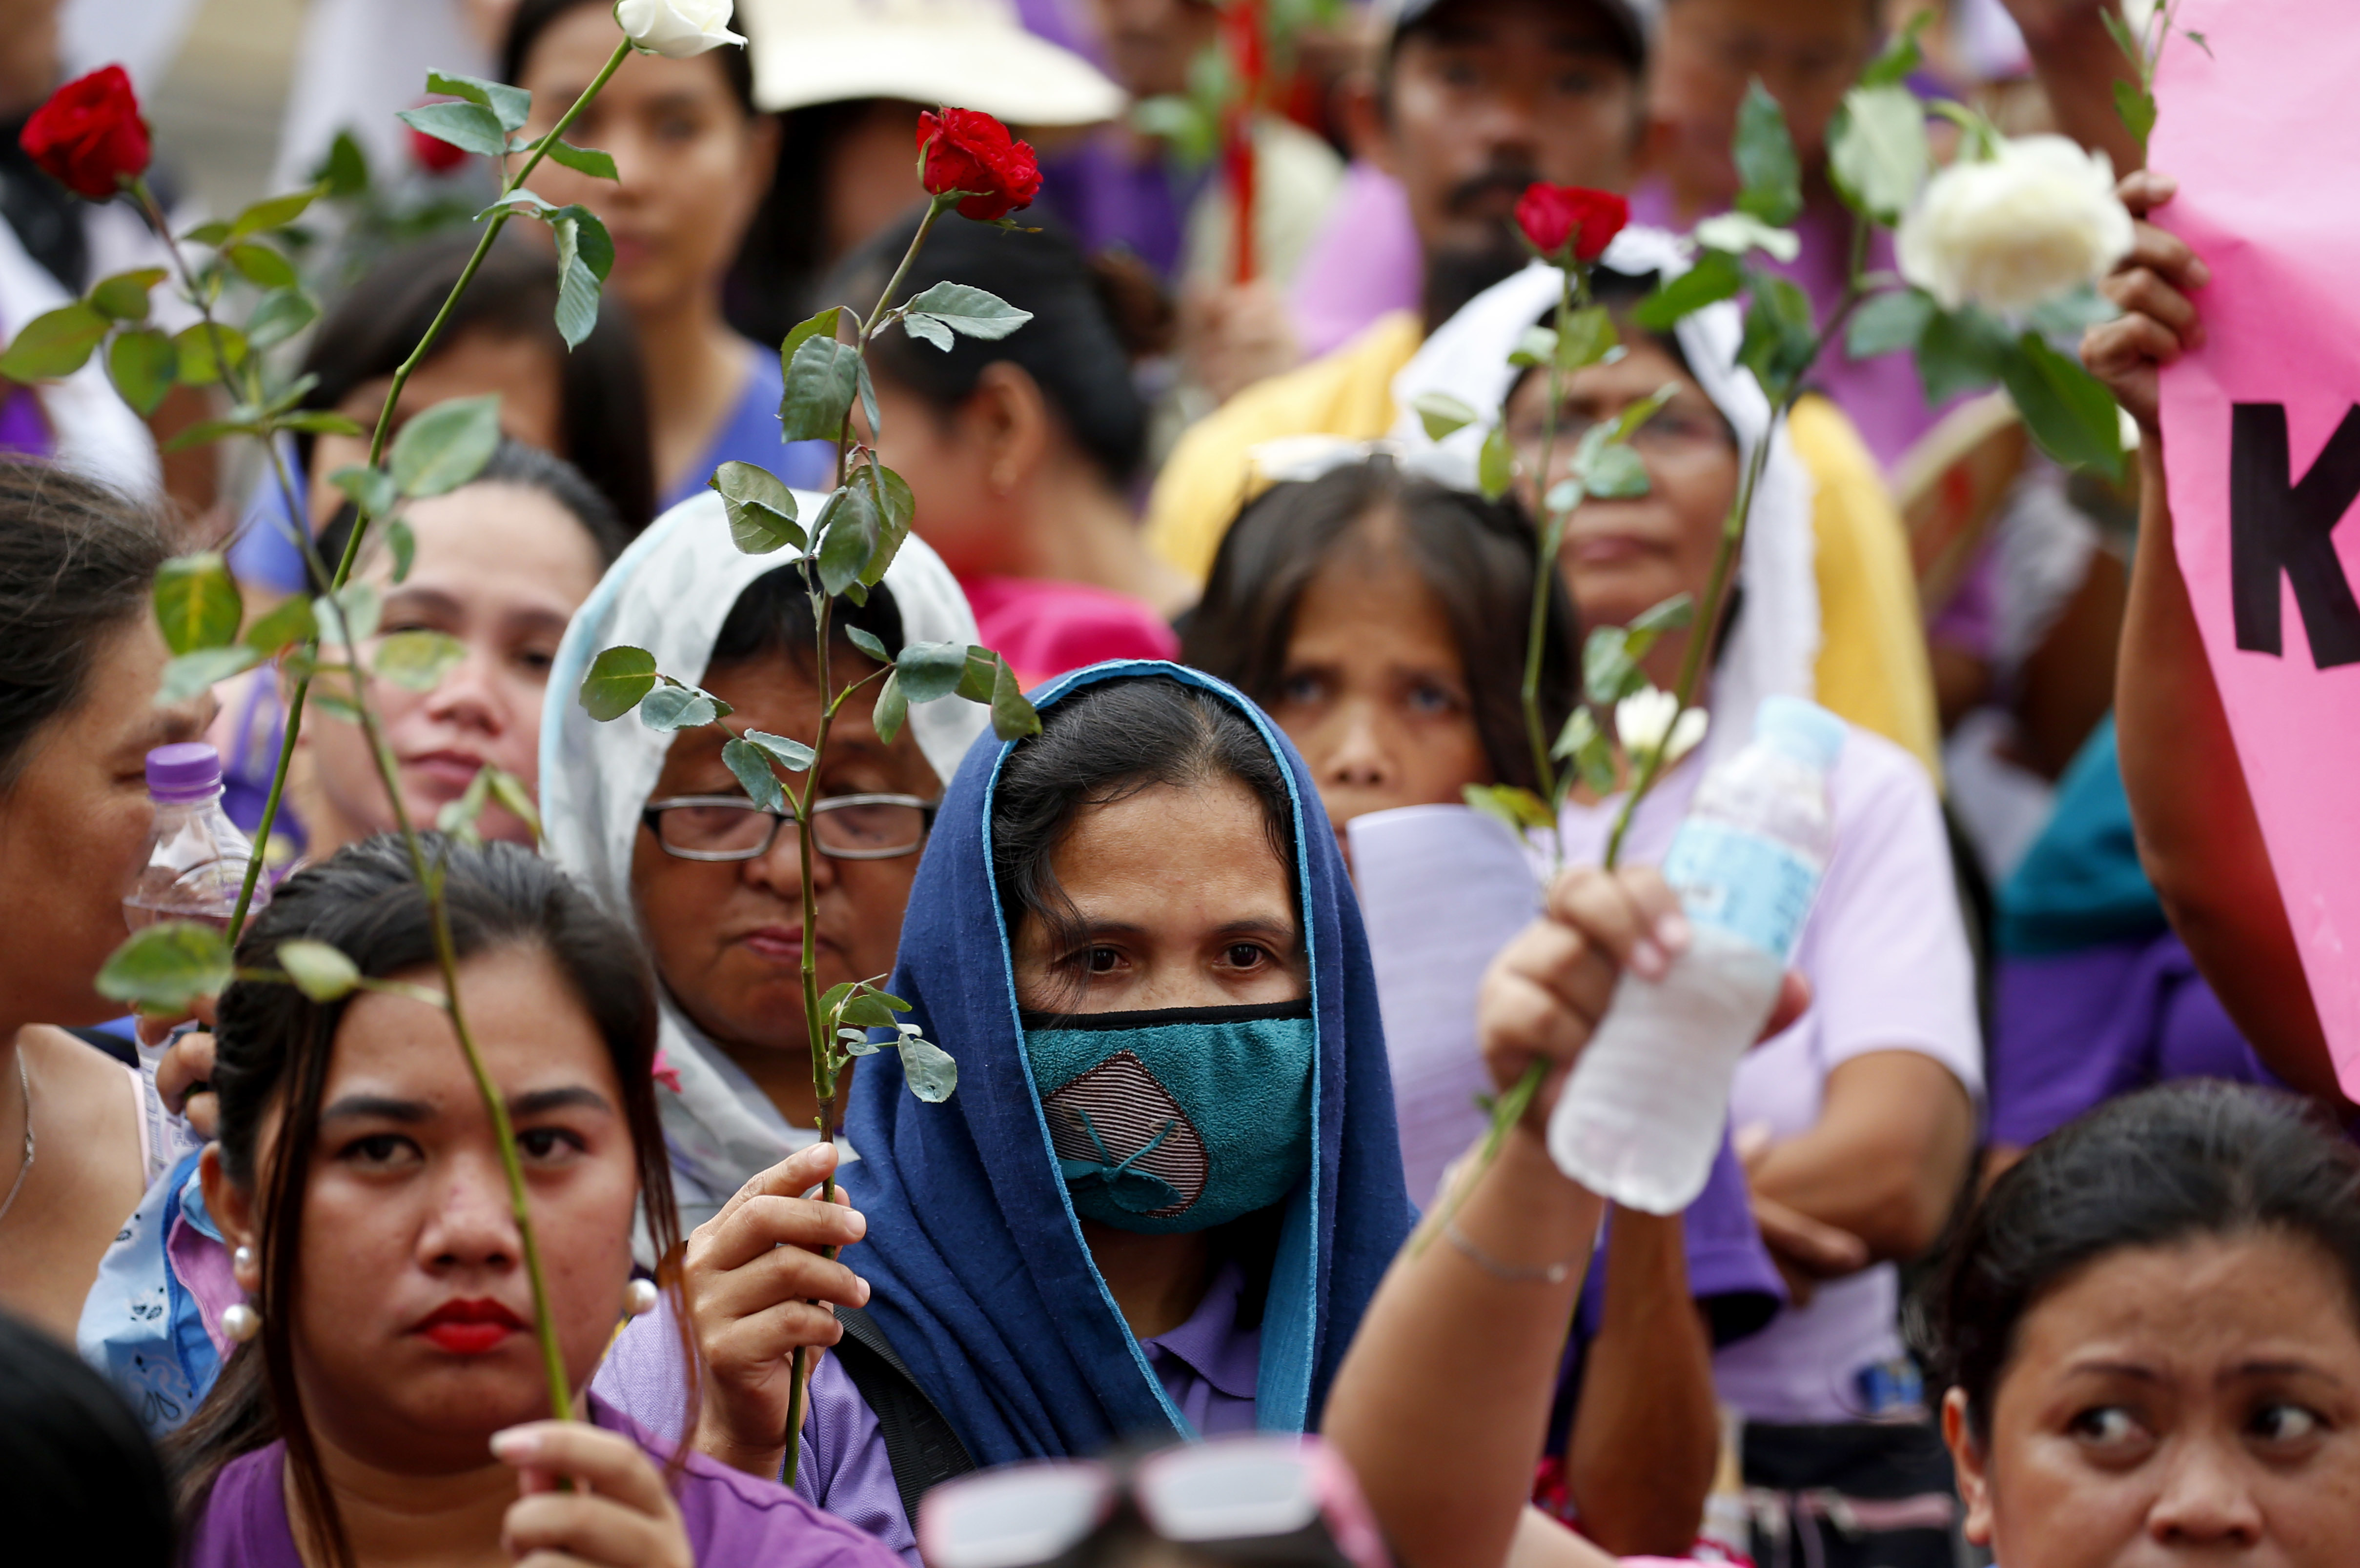 Protesters hold flowers during a rally to mark International Women's Day Thursday, March 8, 2018 in Manila, Philippines. Hundreds of women activists in pink and purple shirts protested against President Rodrigo Duterte in the Philippines on Thursday, as marches and demonstrations in Asia kicked off International Women’s Day. (AP Photo/Bullit Marquez)